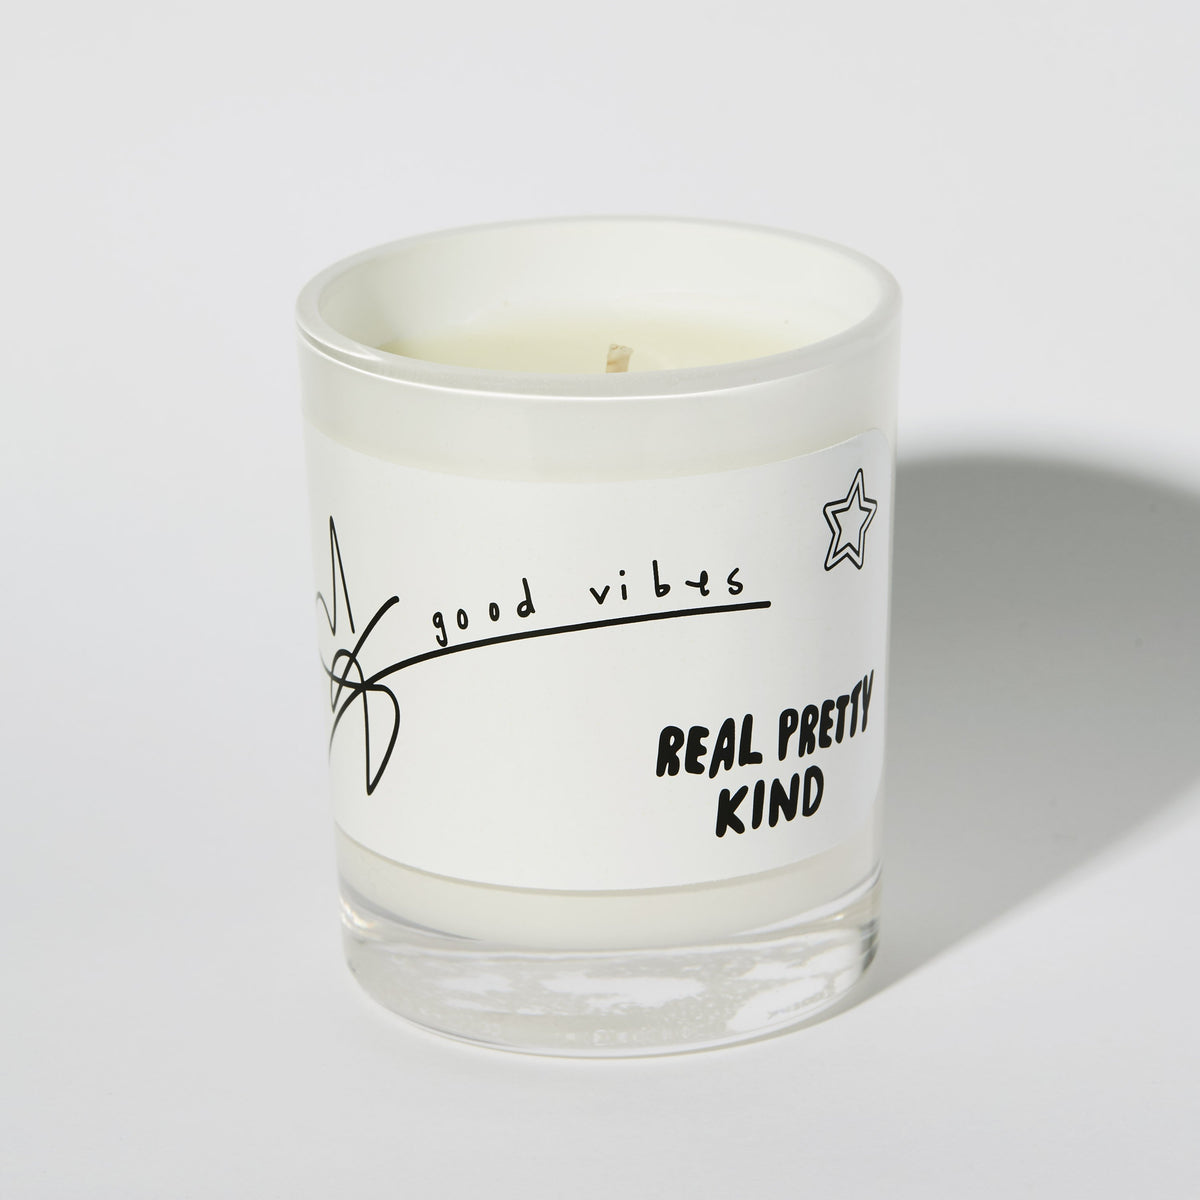 ESSENTIAL OIL INFUSED CANDLES – GOOD VIBES